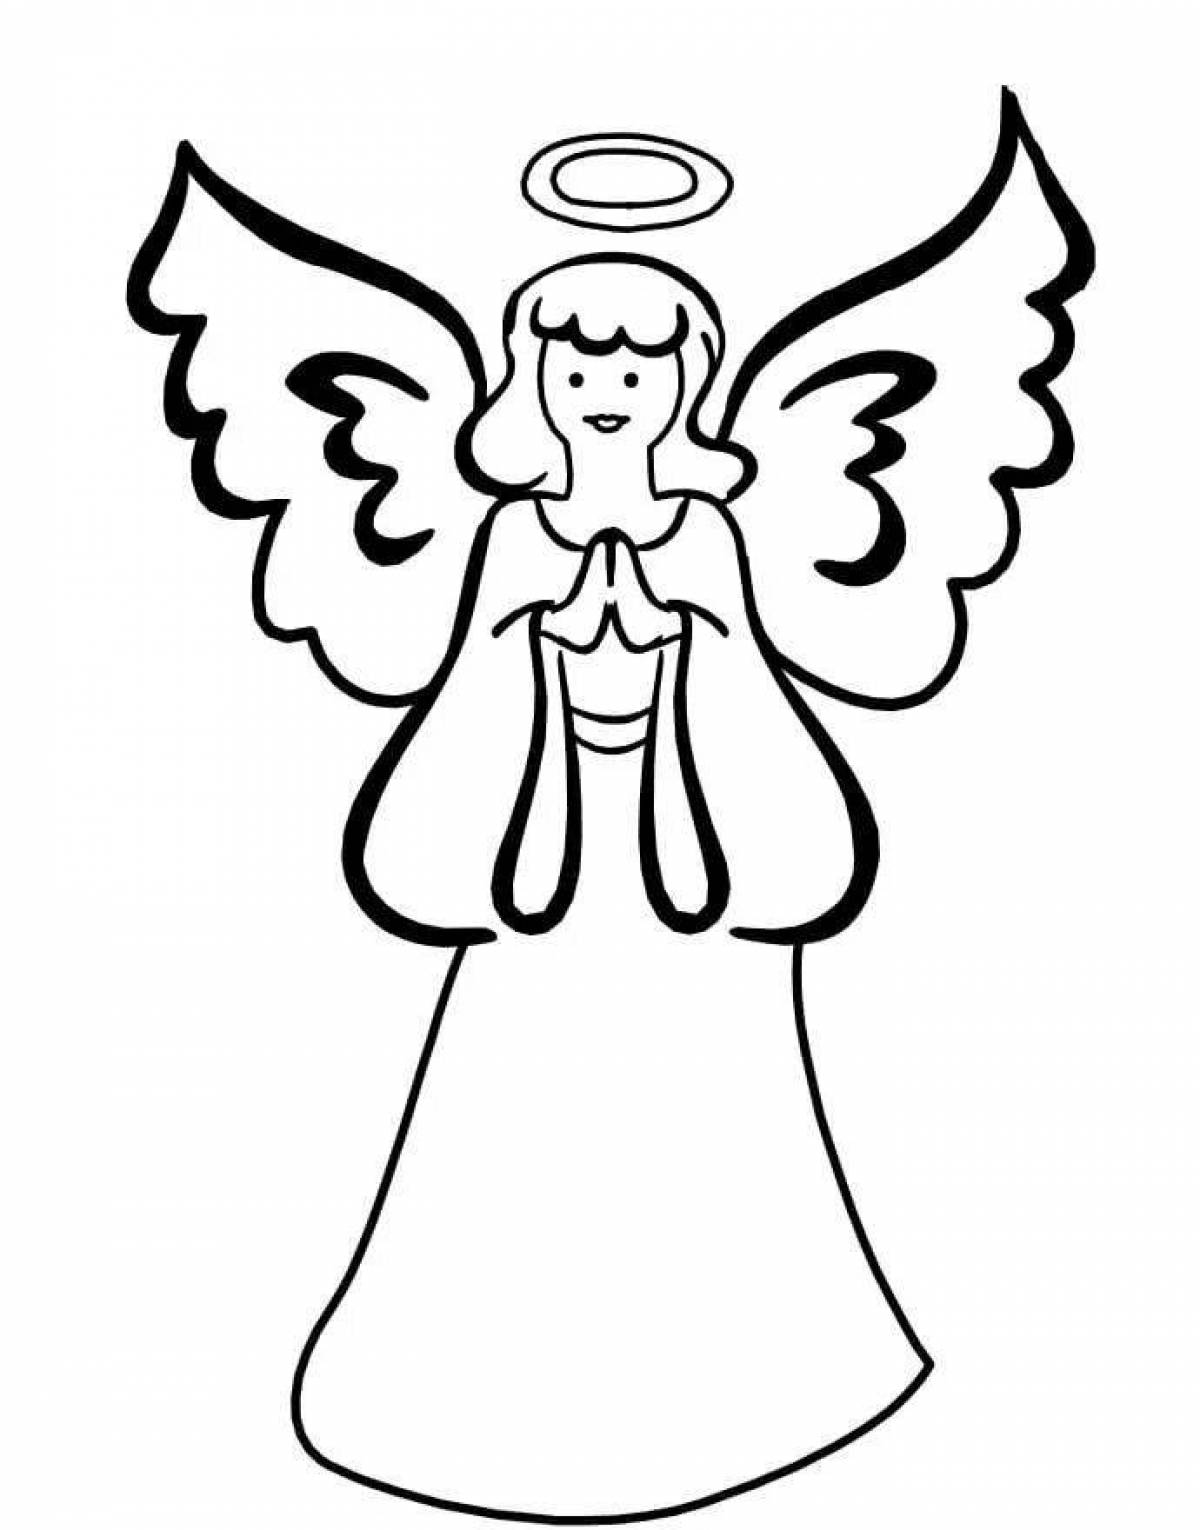 Children's dainty angel coloring book